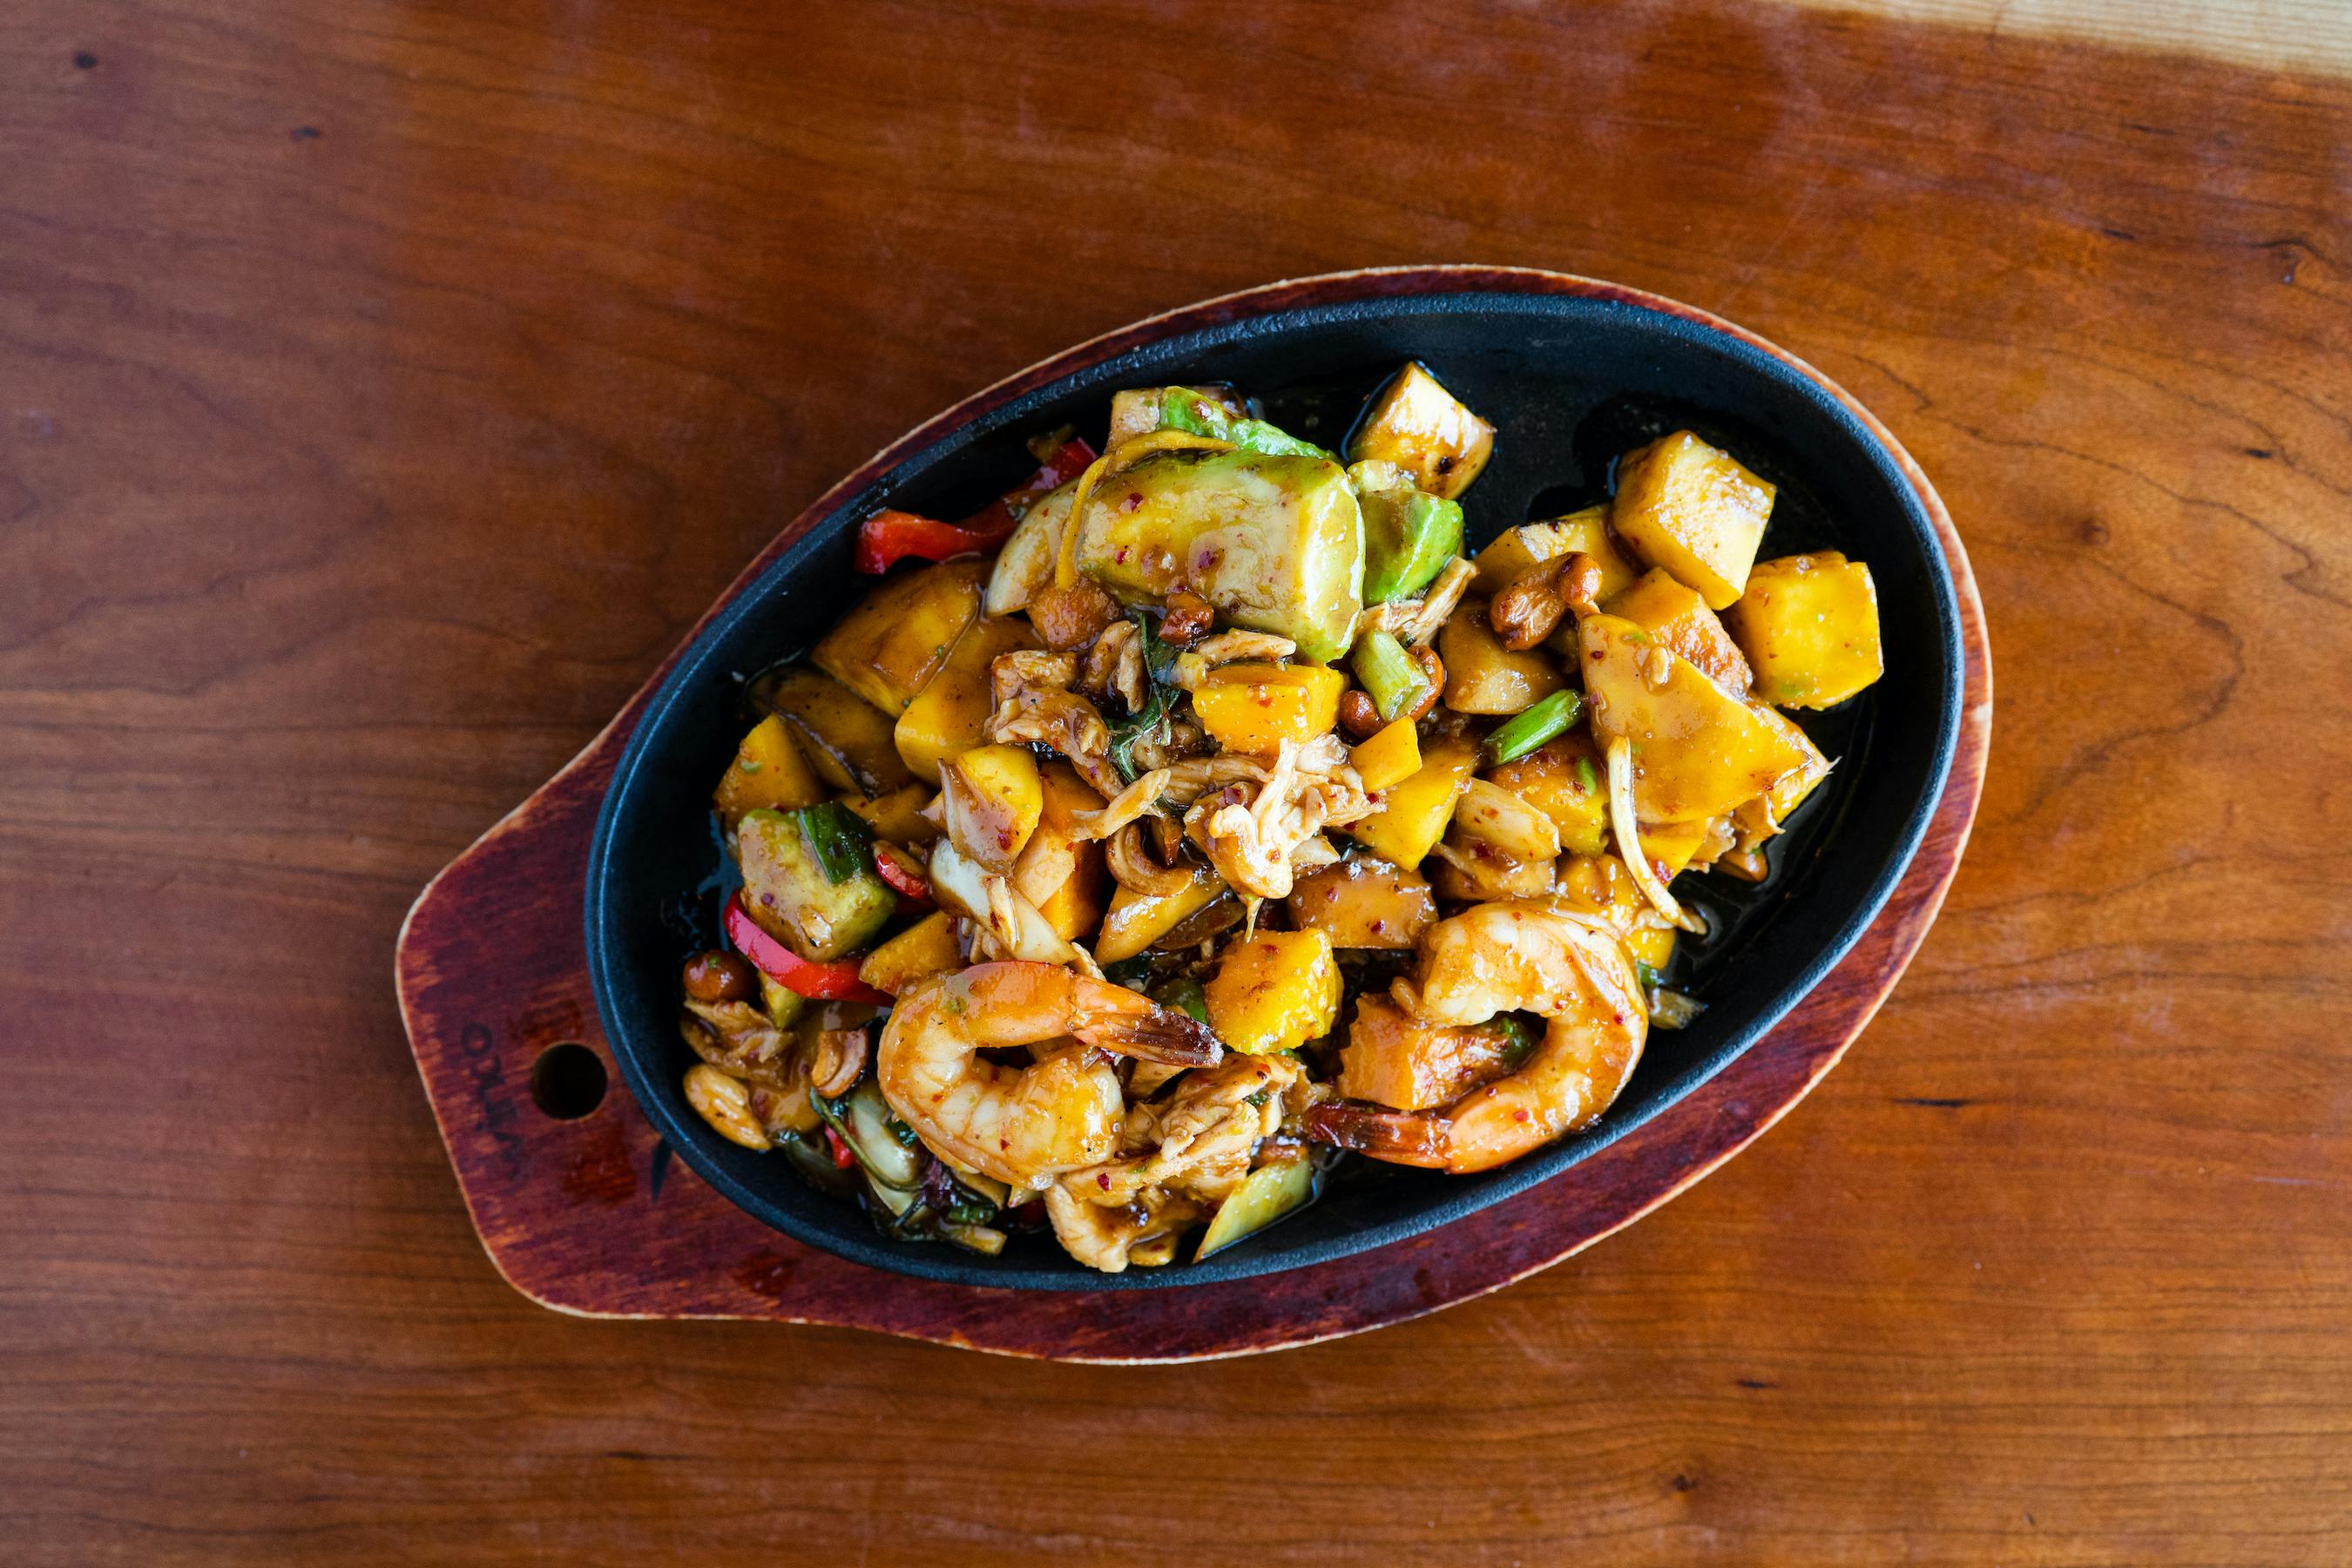 Sizzling Tropical from City Thai Cuisine in Portland, OR